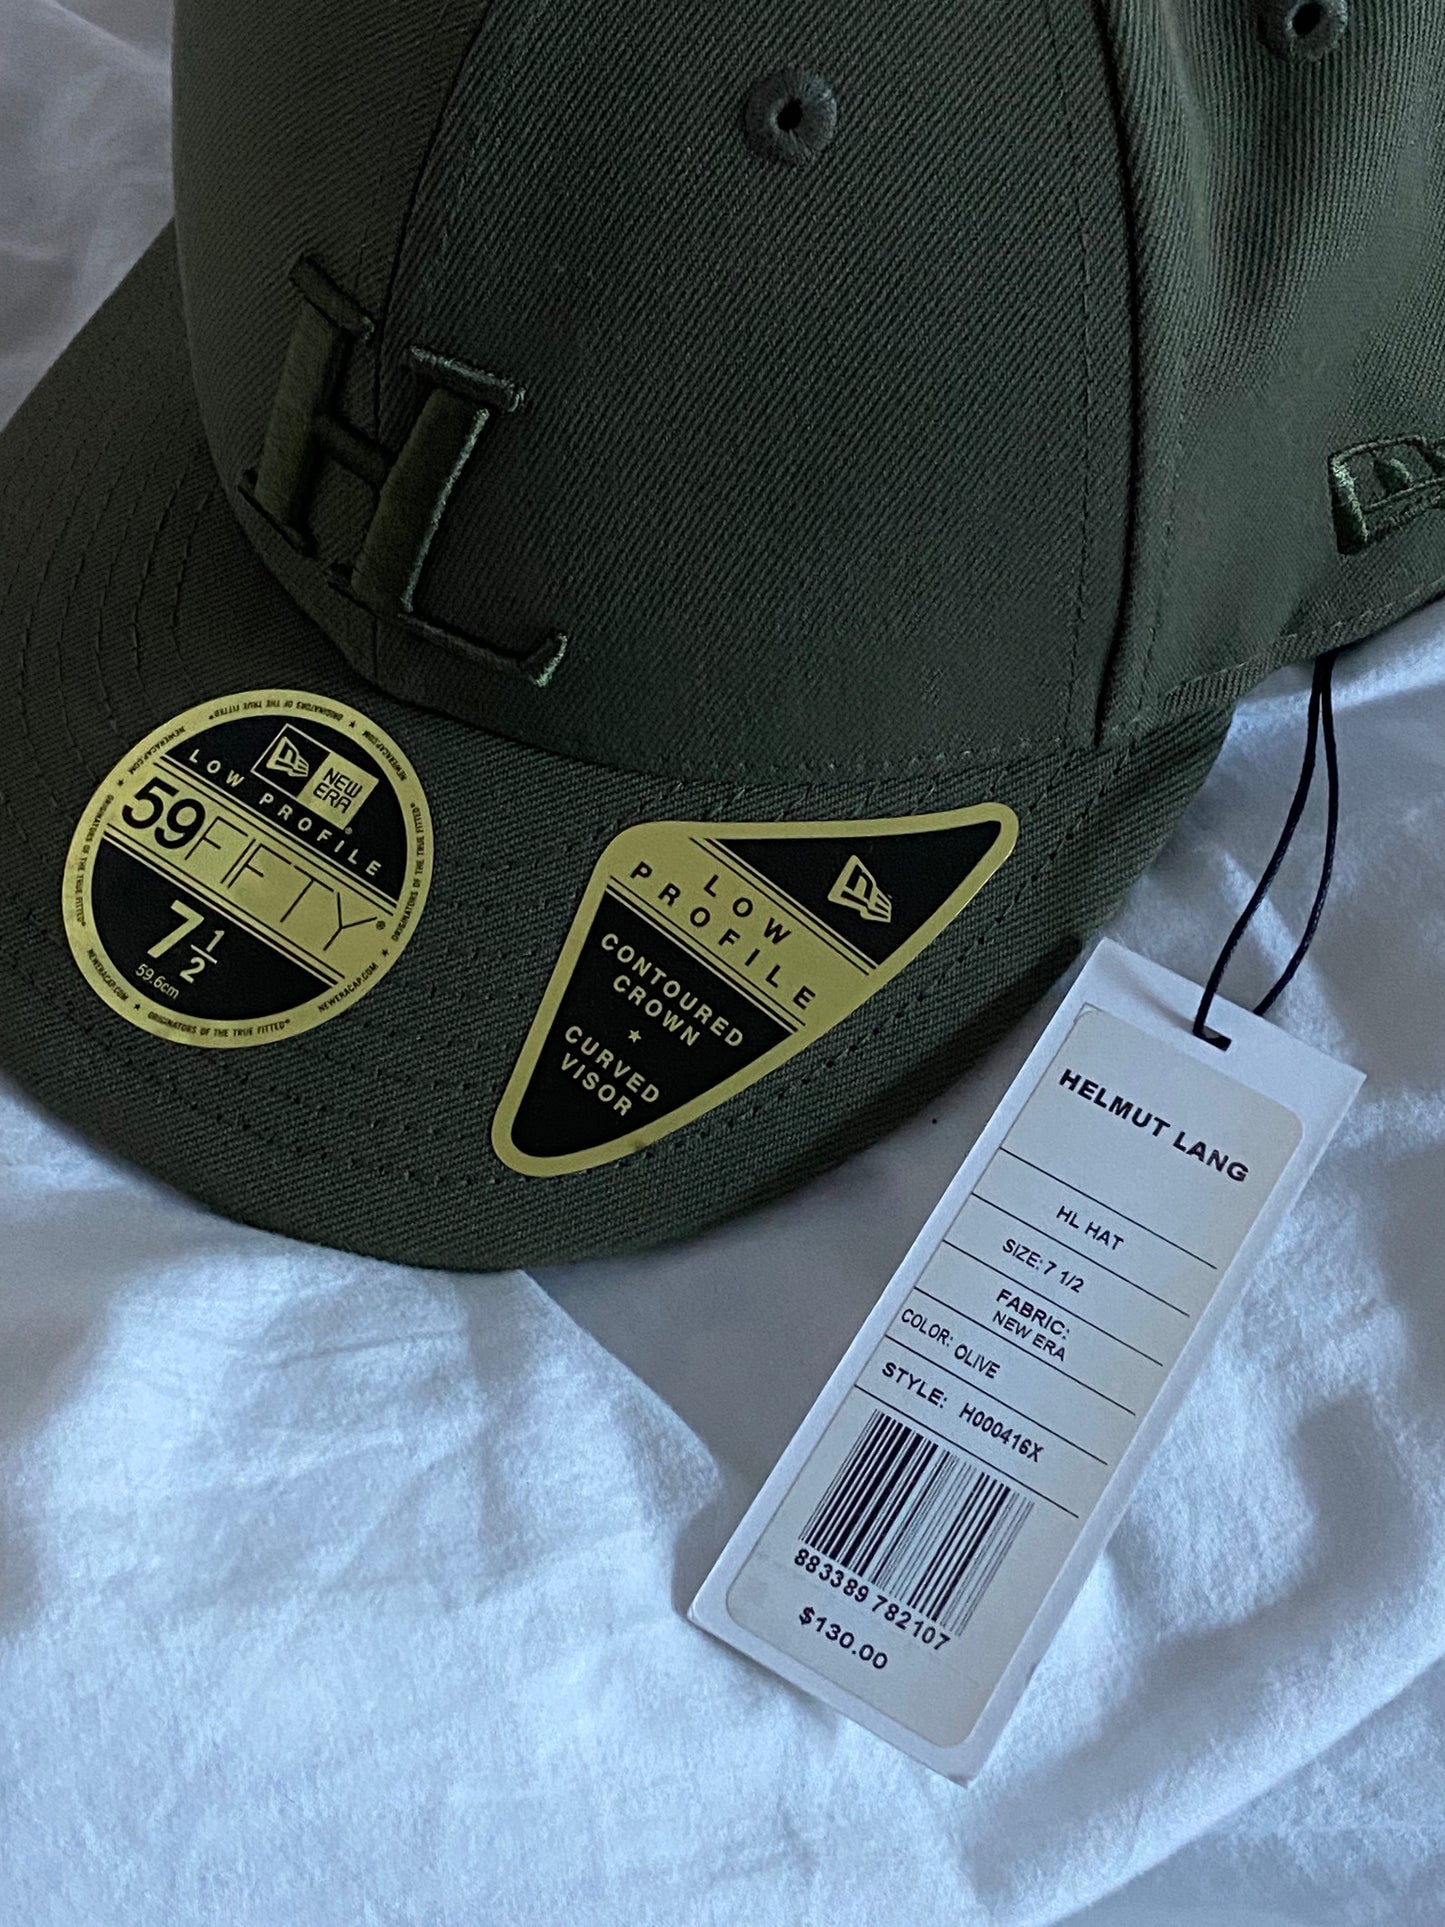 HELMUT LANG X NEW ERA LOW PROFILE FITTED HAT.